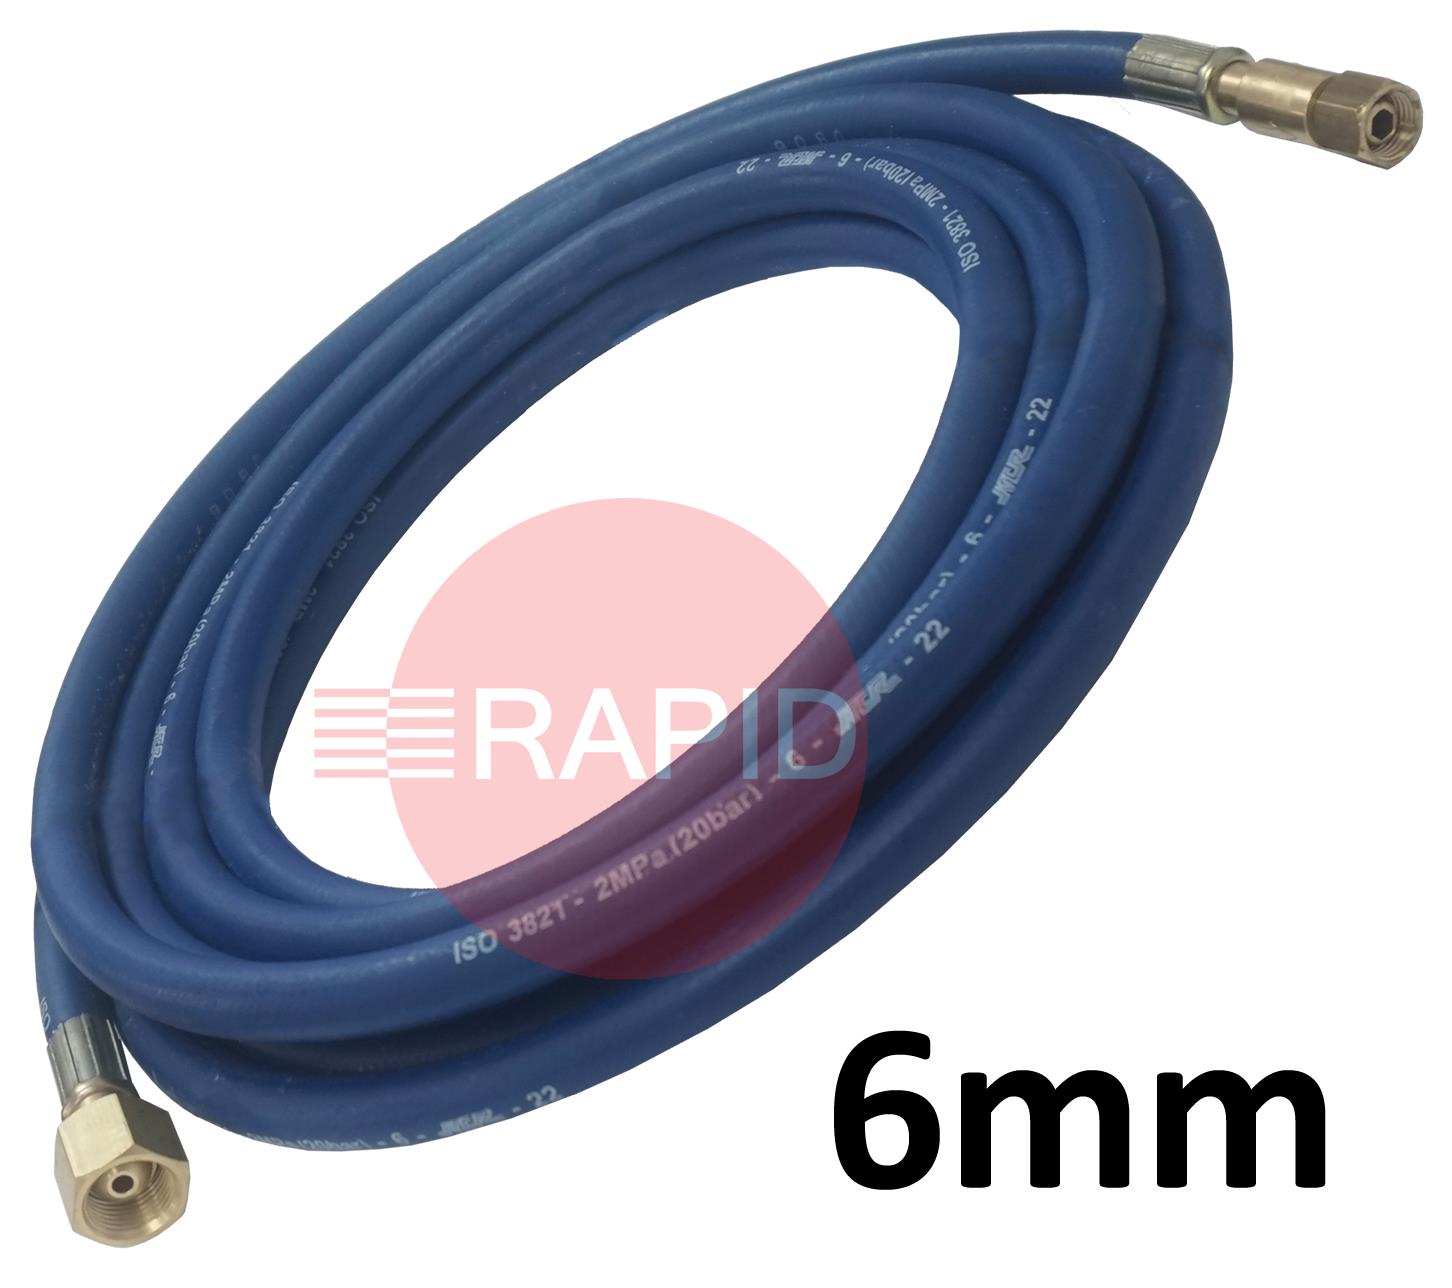 A5109  Fitted Oxygen Hose. 6mm Bore. G1/4 Check Valve & G3/8 Regulator Connection - 10m